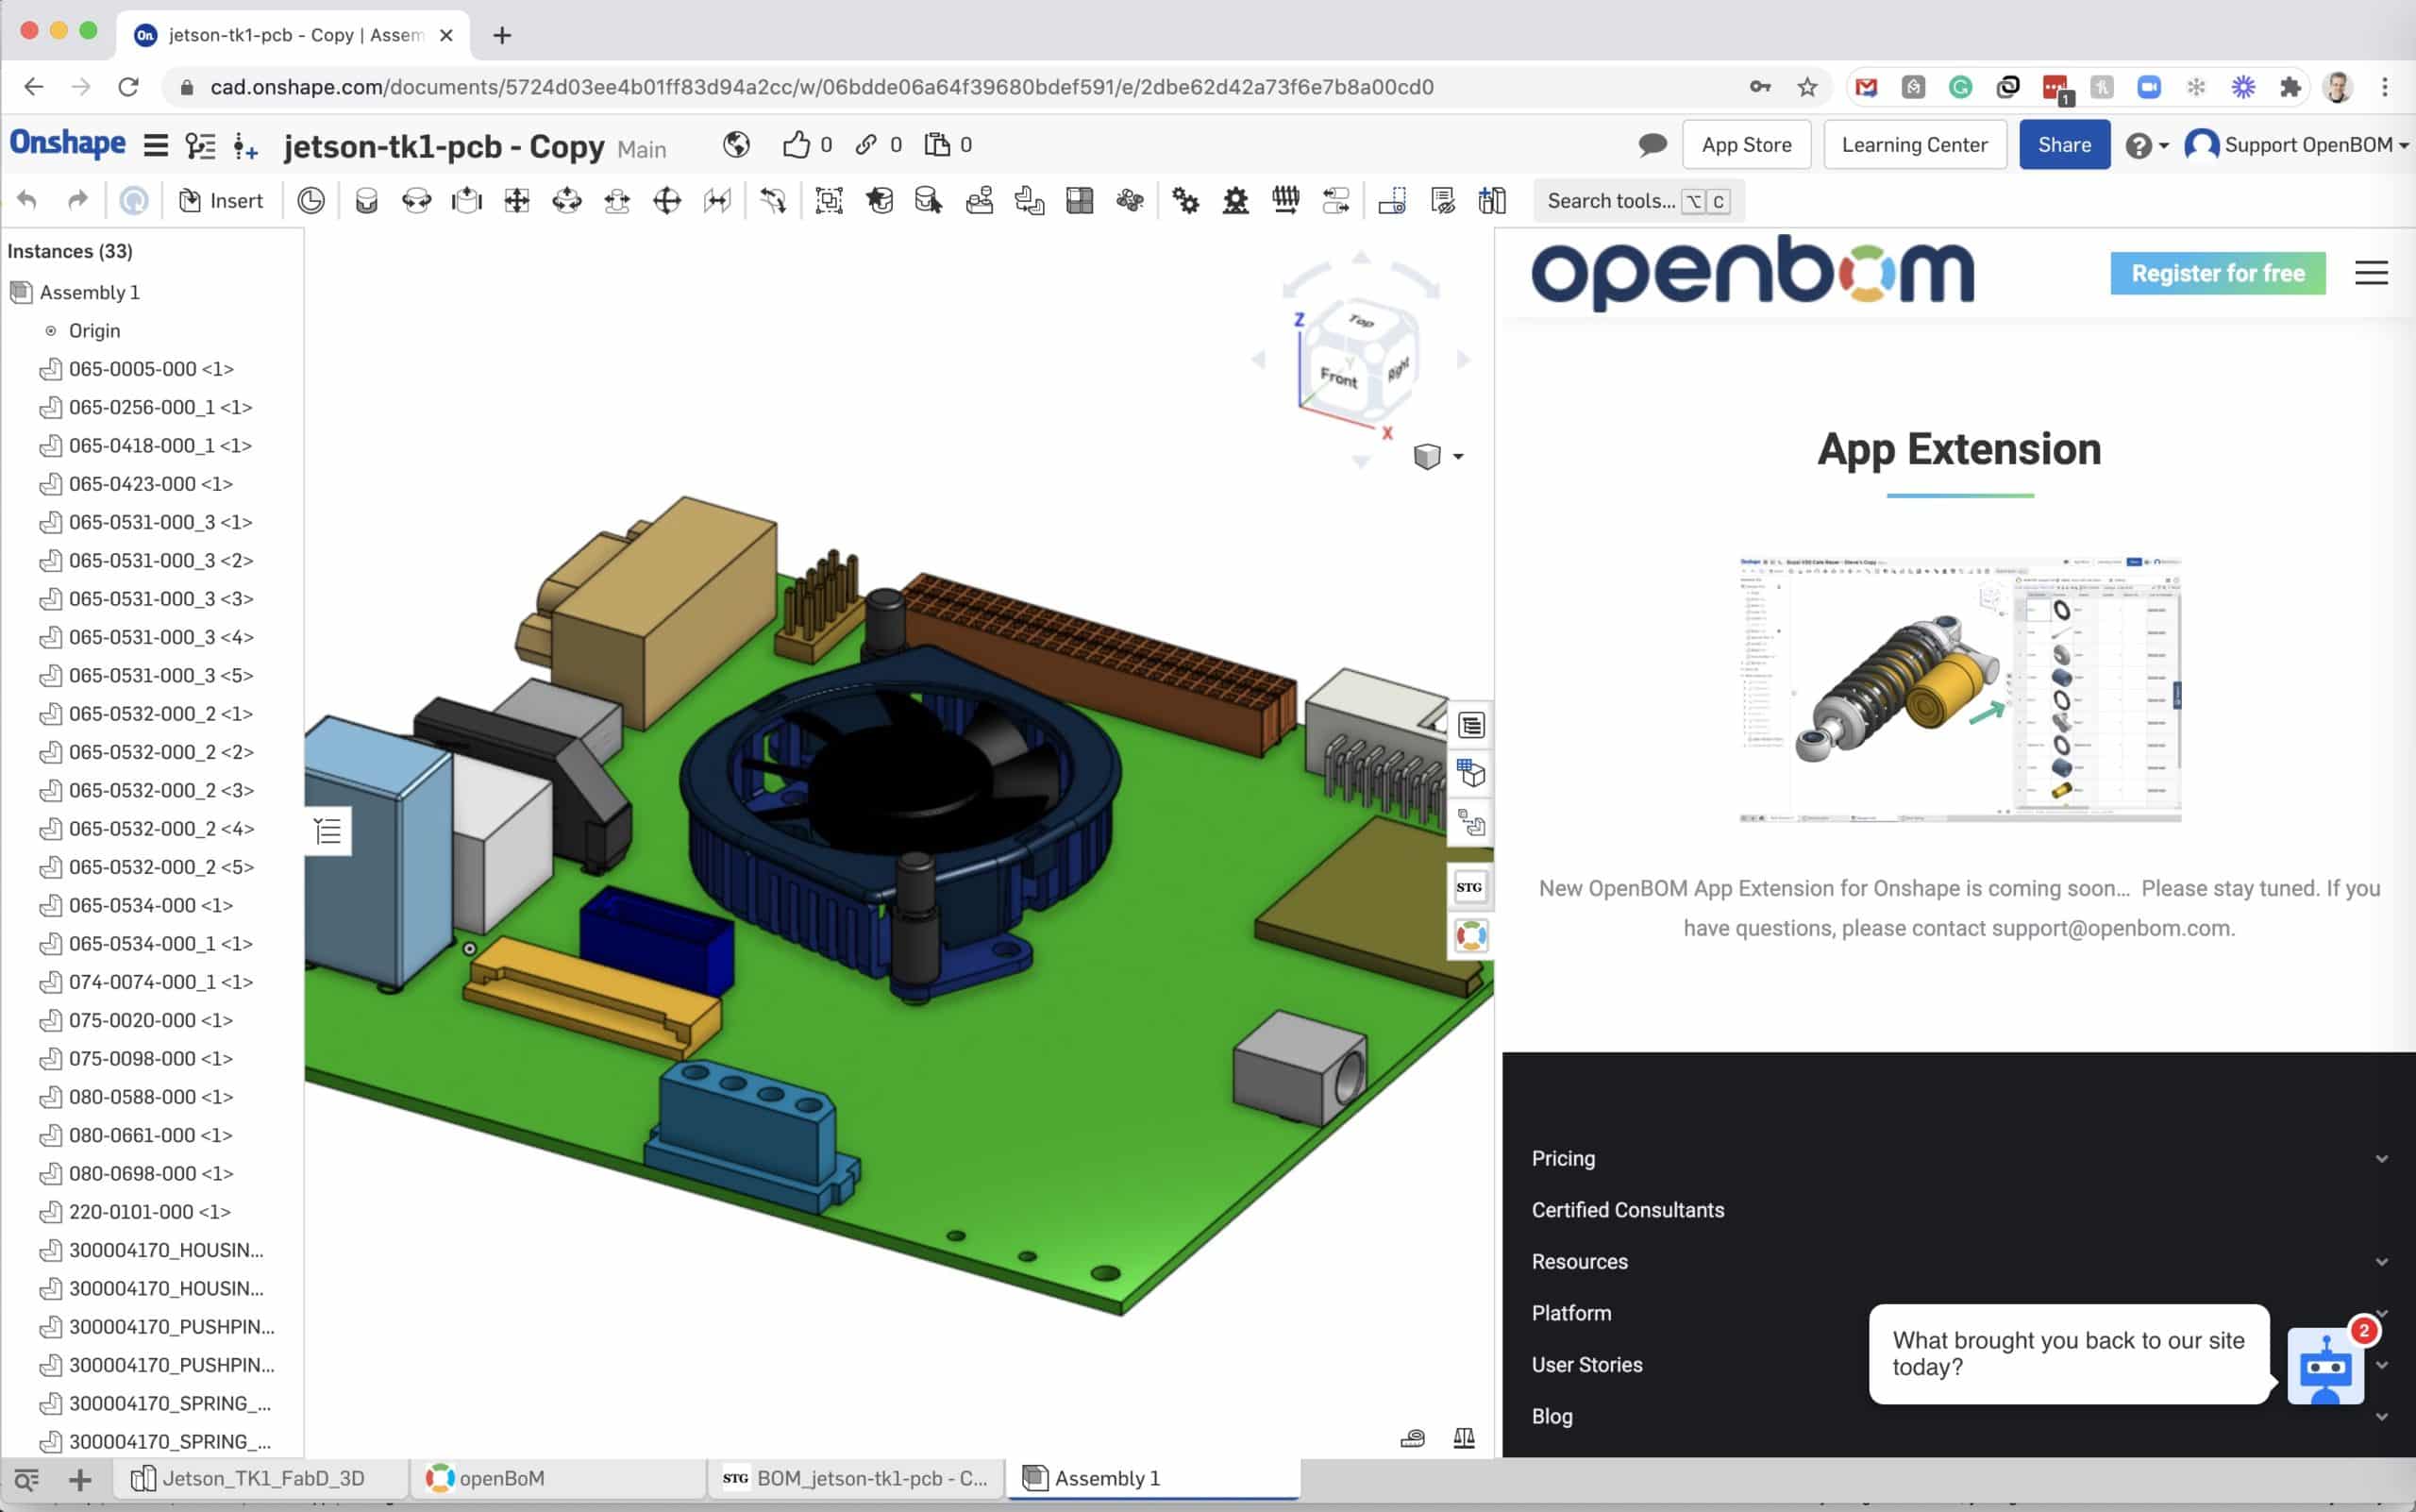 OpenBOM App Extension for Onshape is Coming